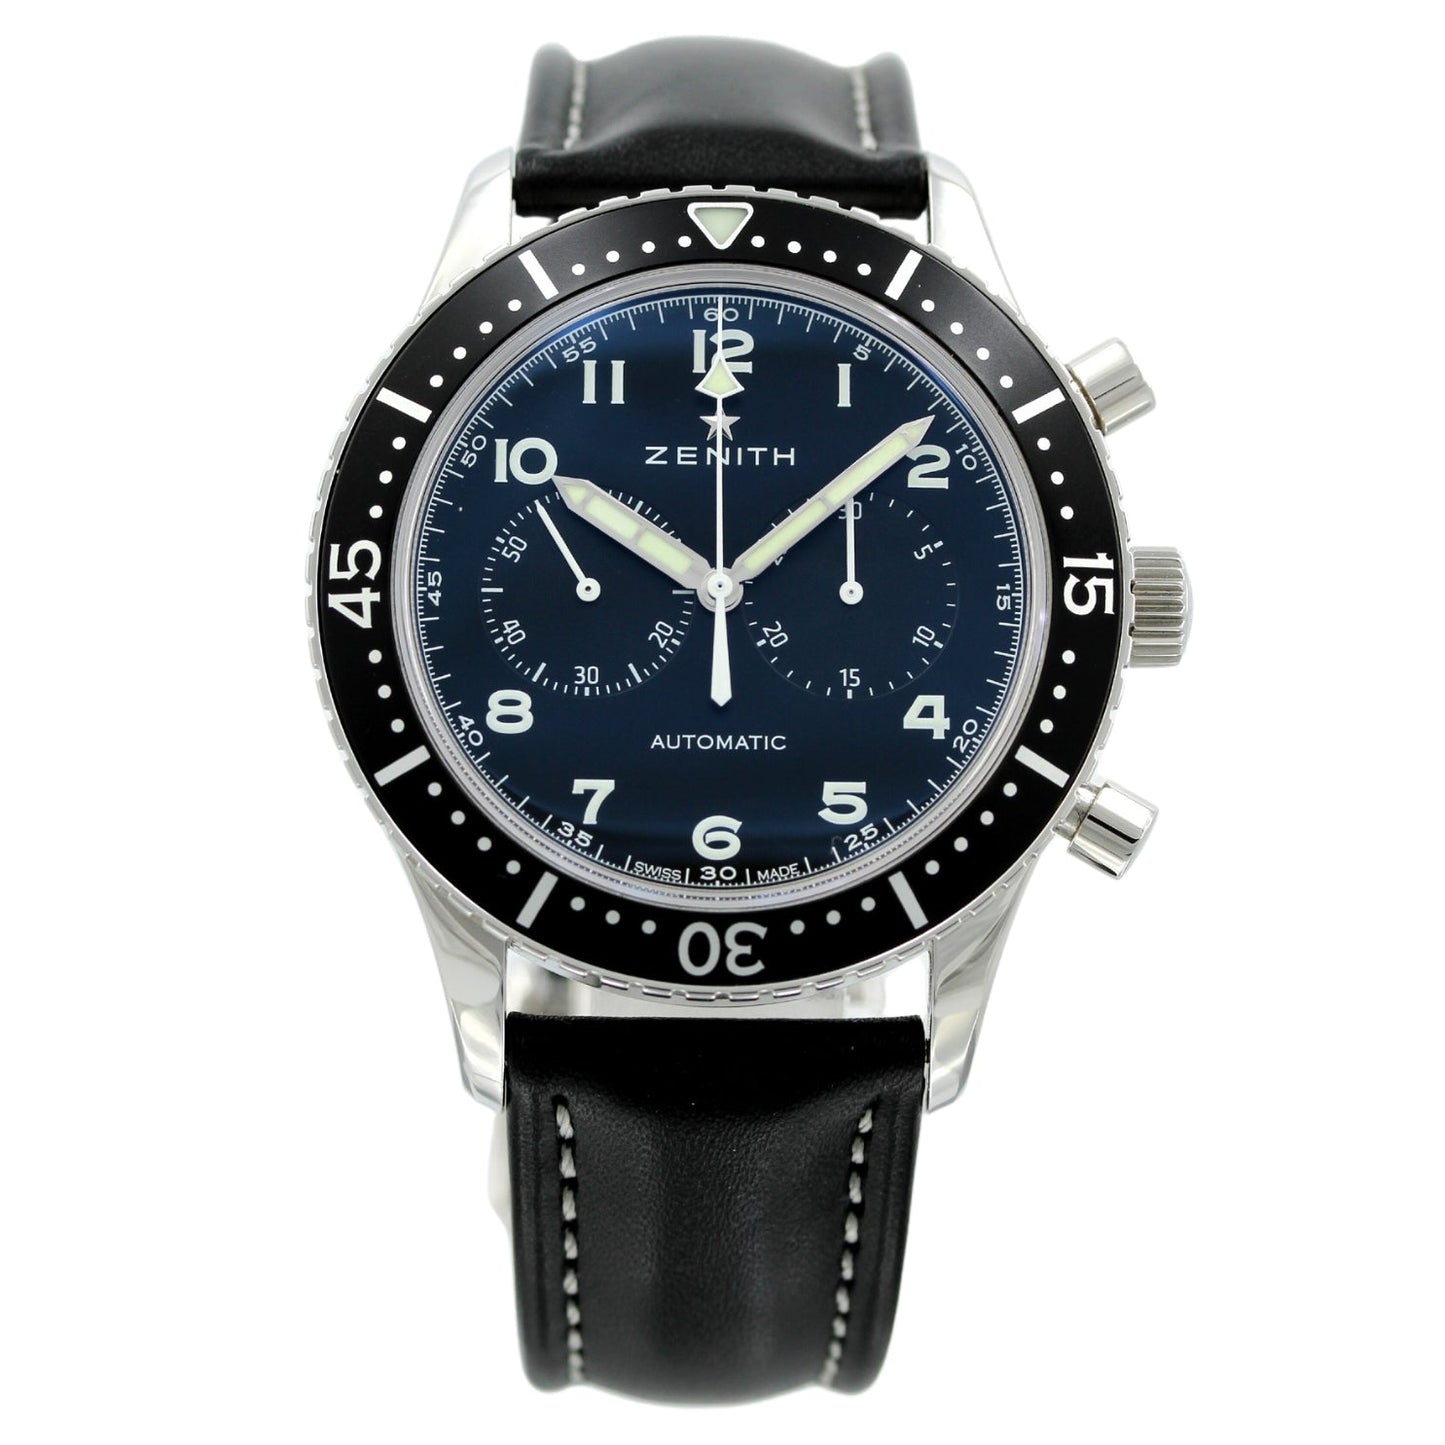 Zenith Pilot Chronometro Tipo Heritage Revival CP-2, Limited 1 out of 1000, 11-2019, Ref. 03.2240.4069/21.C774, B+P